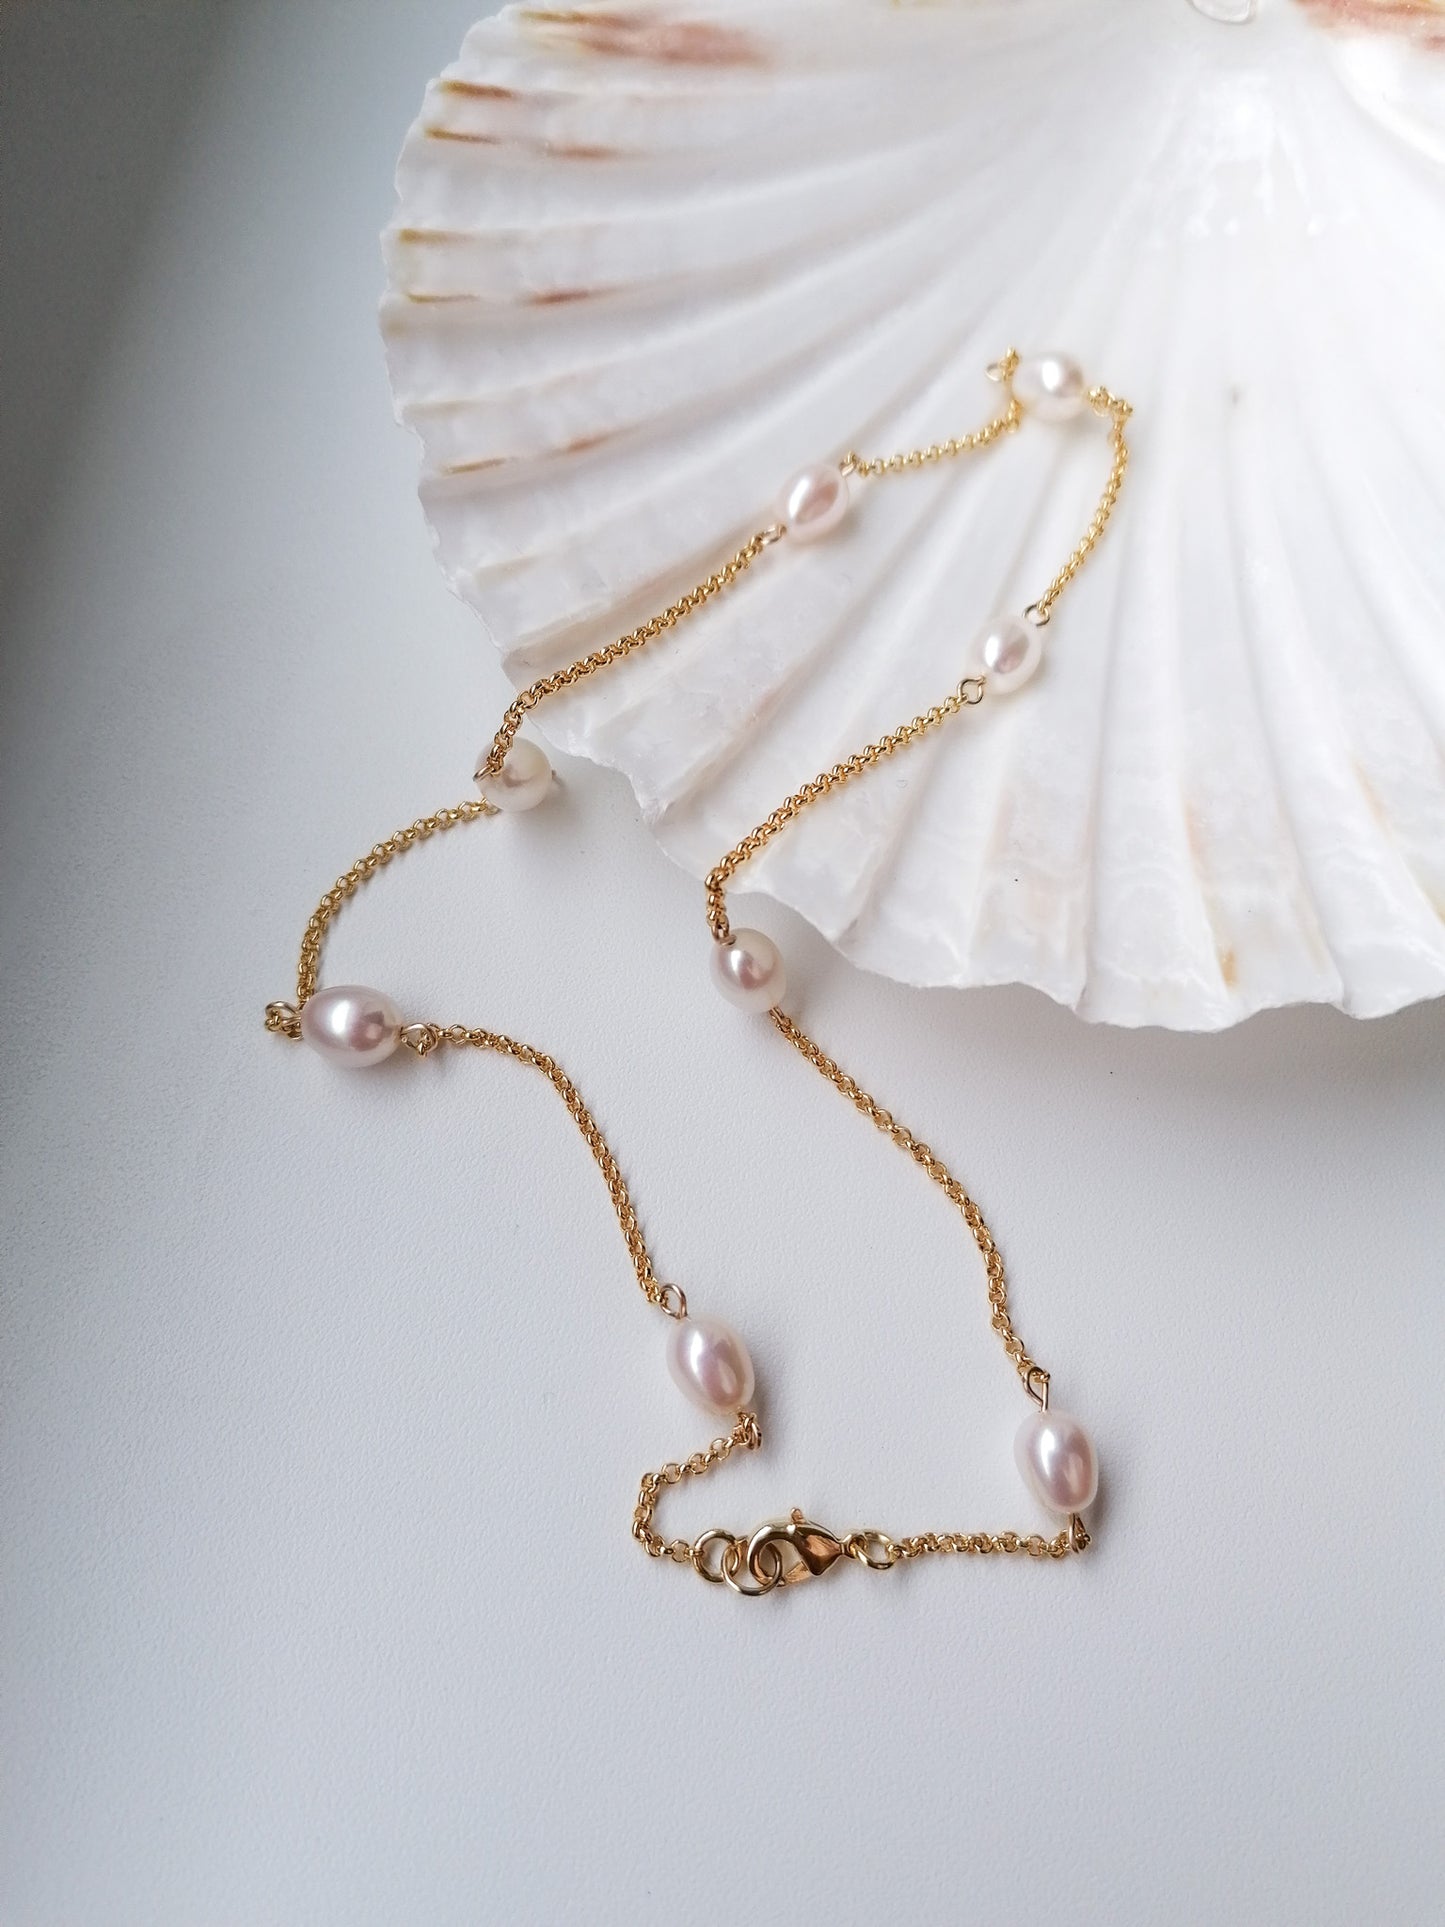 July necklace - gold filled